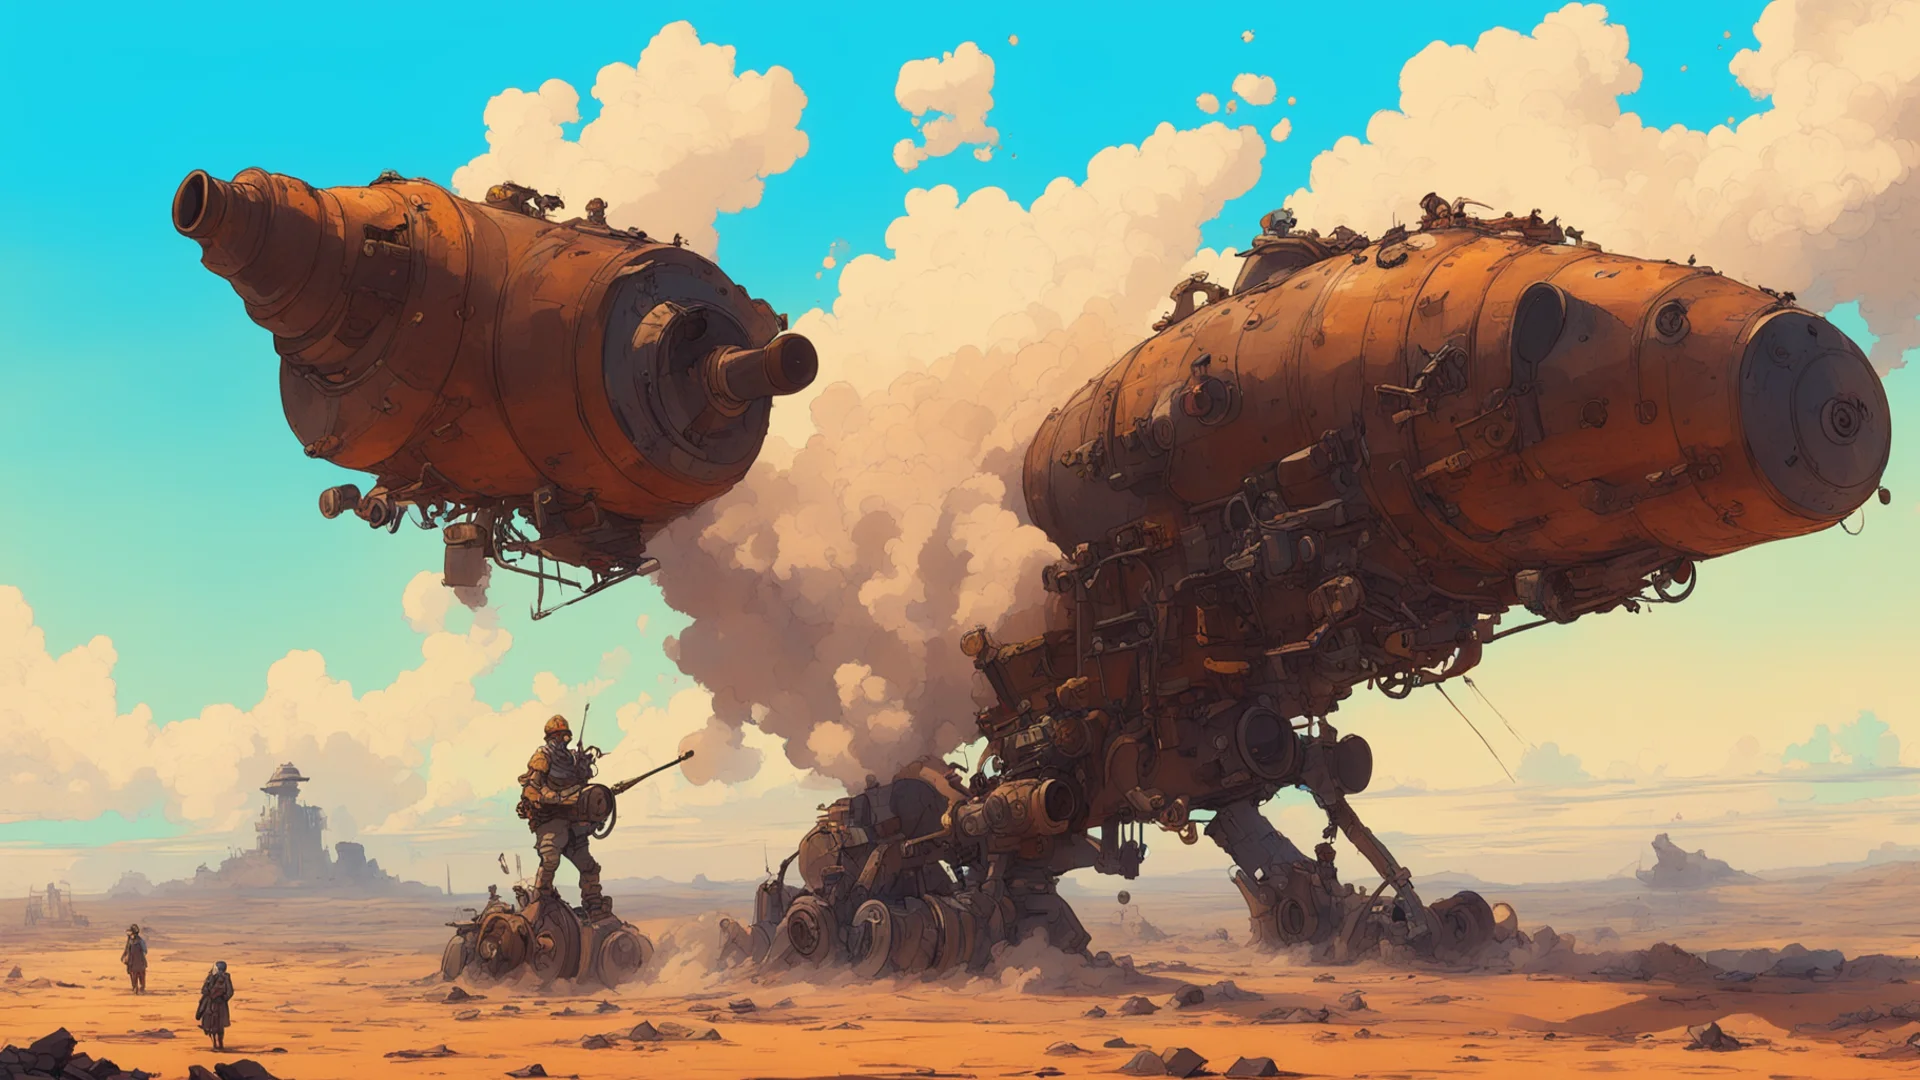 trending a smoking cannon designed by george lucas on a battlefield moebius ghibli ian mcque wallpaper good looking fantastic 1 wide